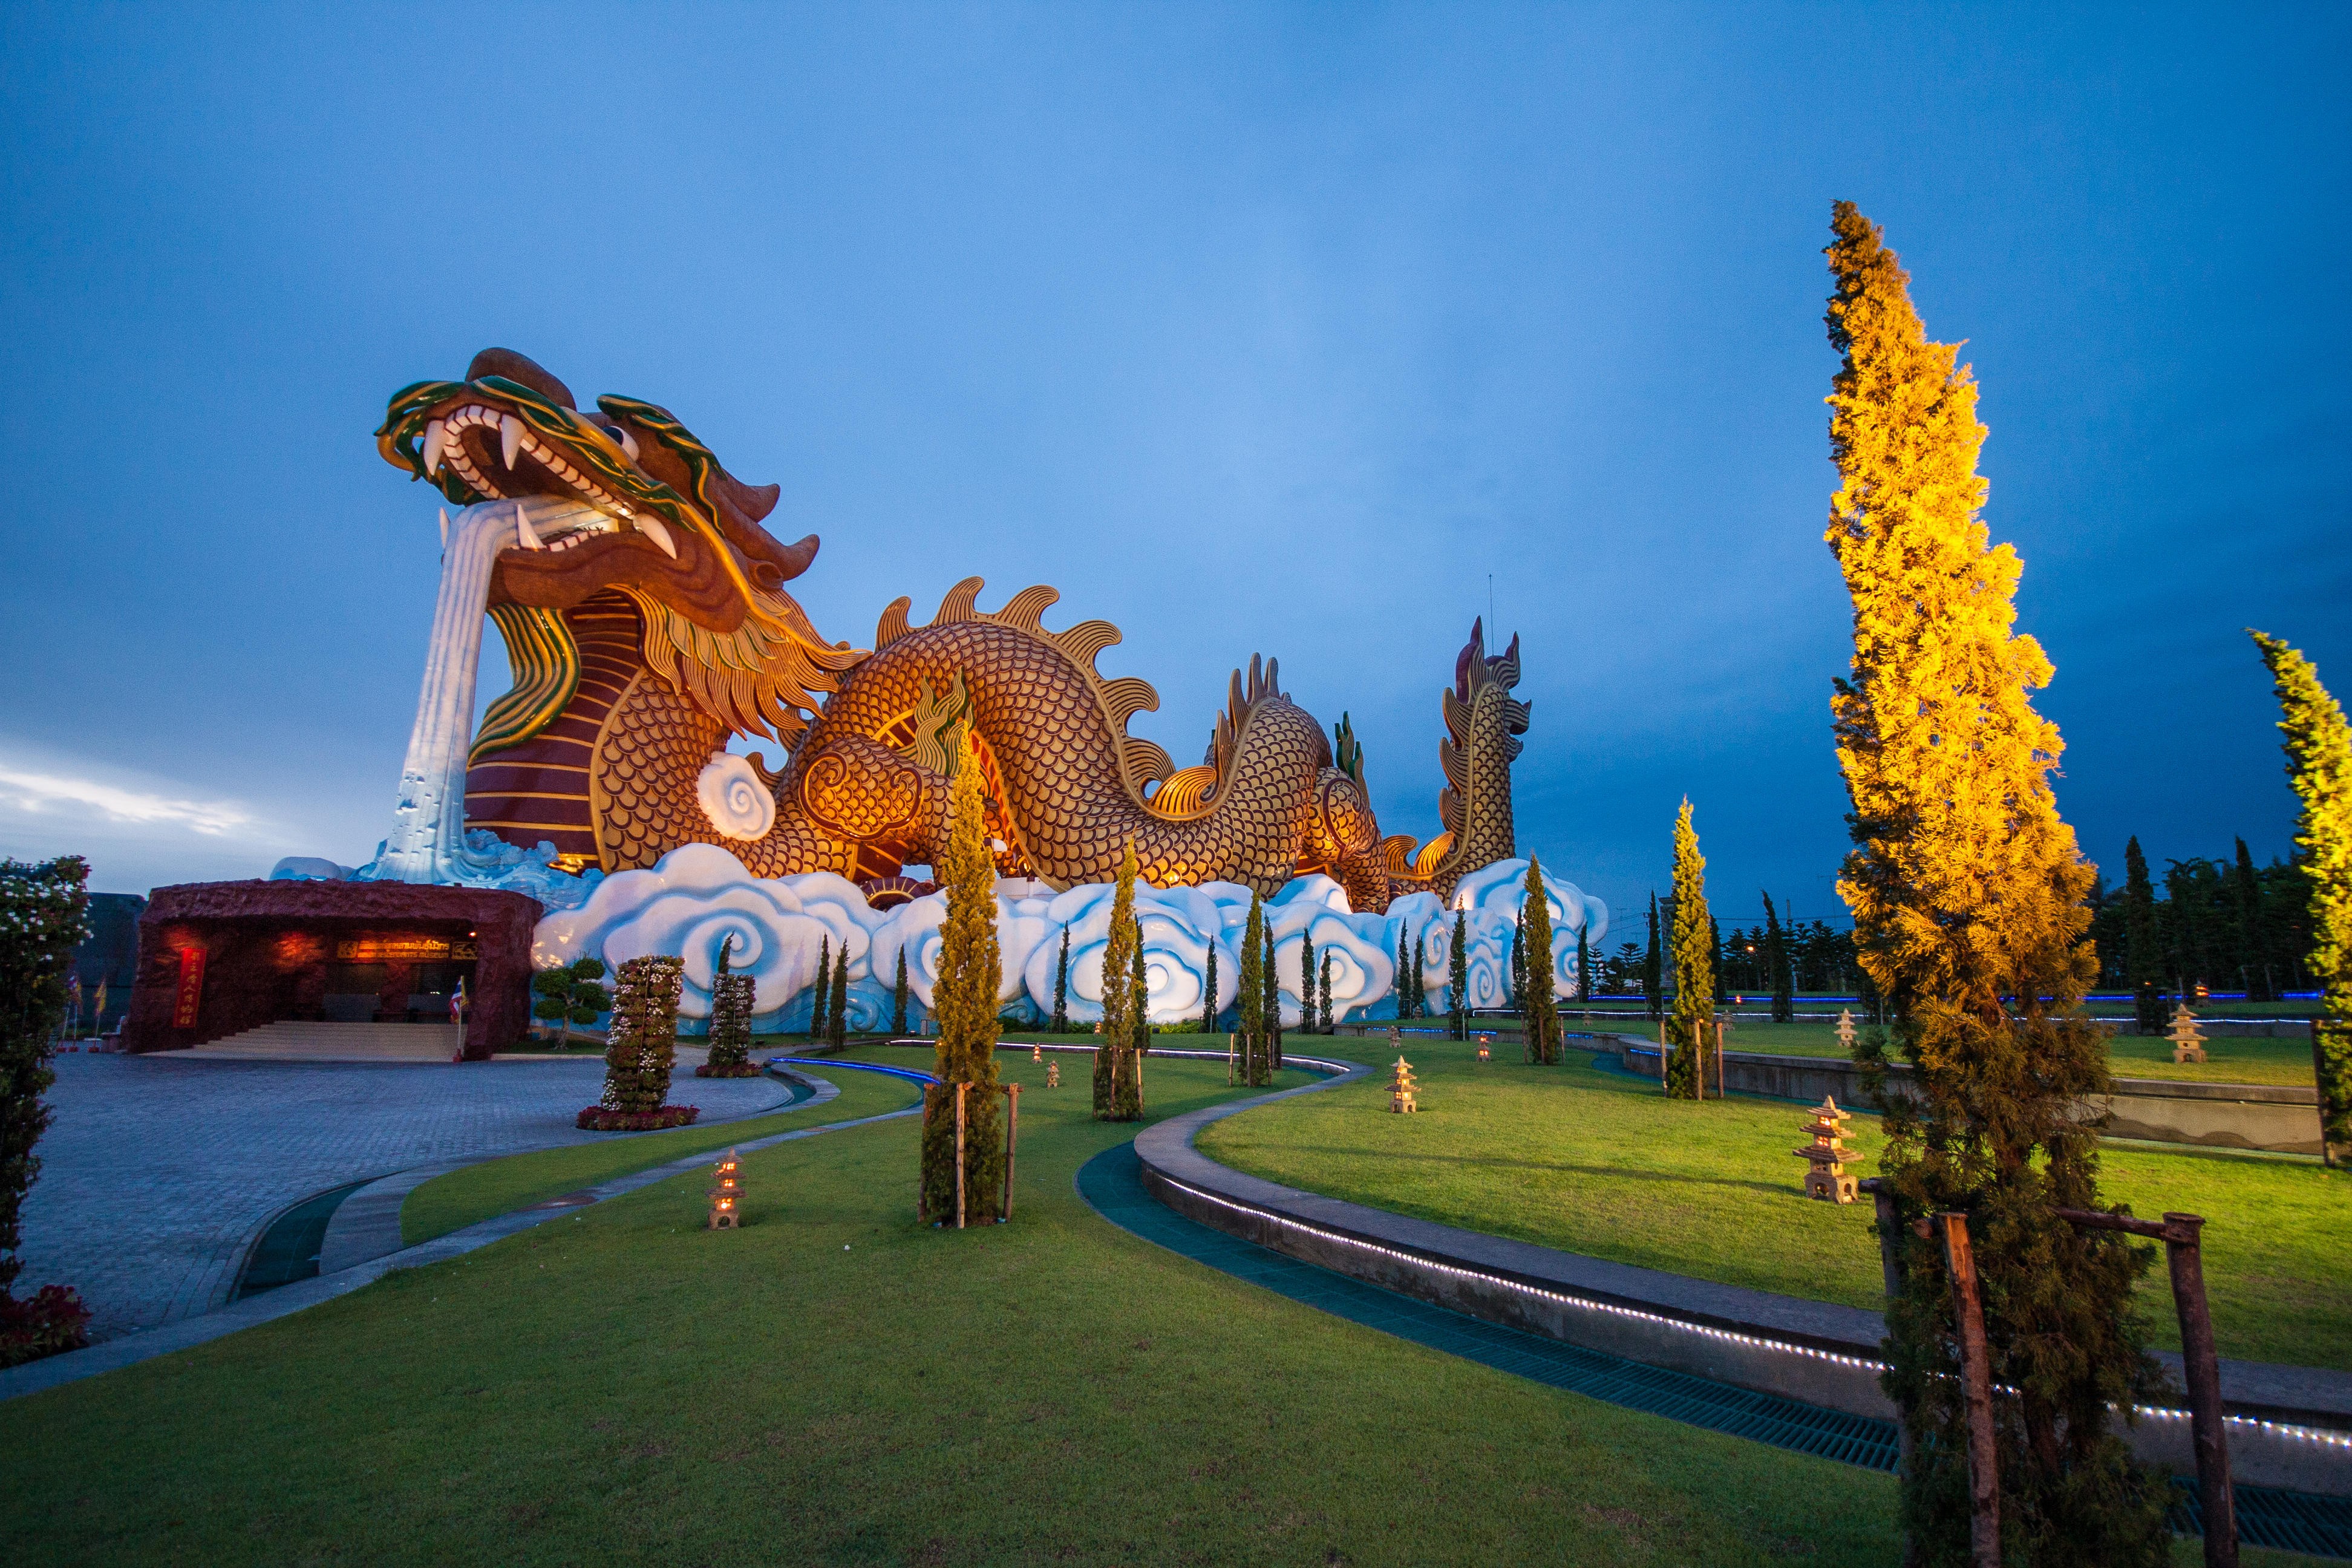 Banharn Silpa-archa, a Thai prime minister, built a museum shaped like a mythical Chinese dragon to celebrate China’s culture and Chinese migrants’ part in Thailand’s story. A new statue will soon honour the champion of his hometown